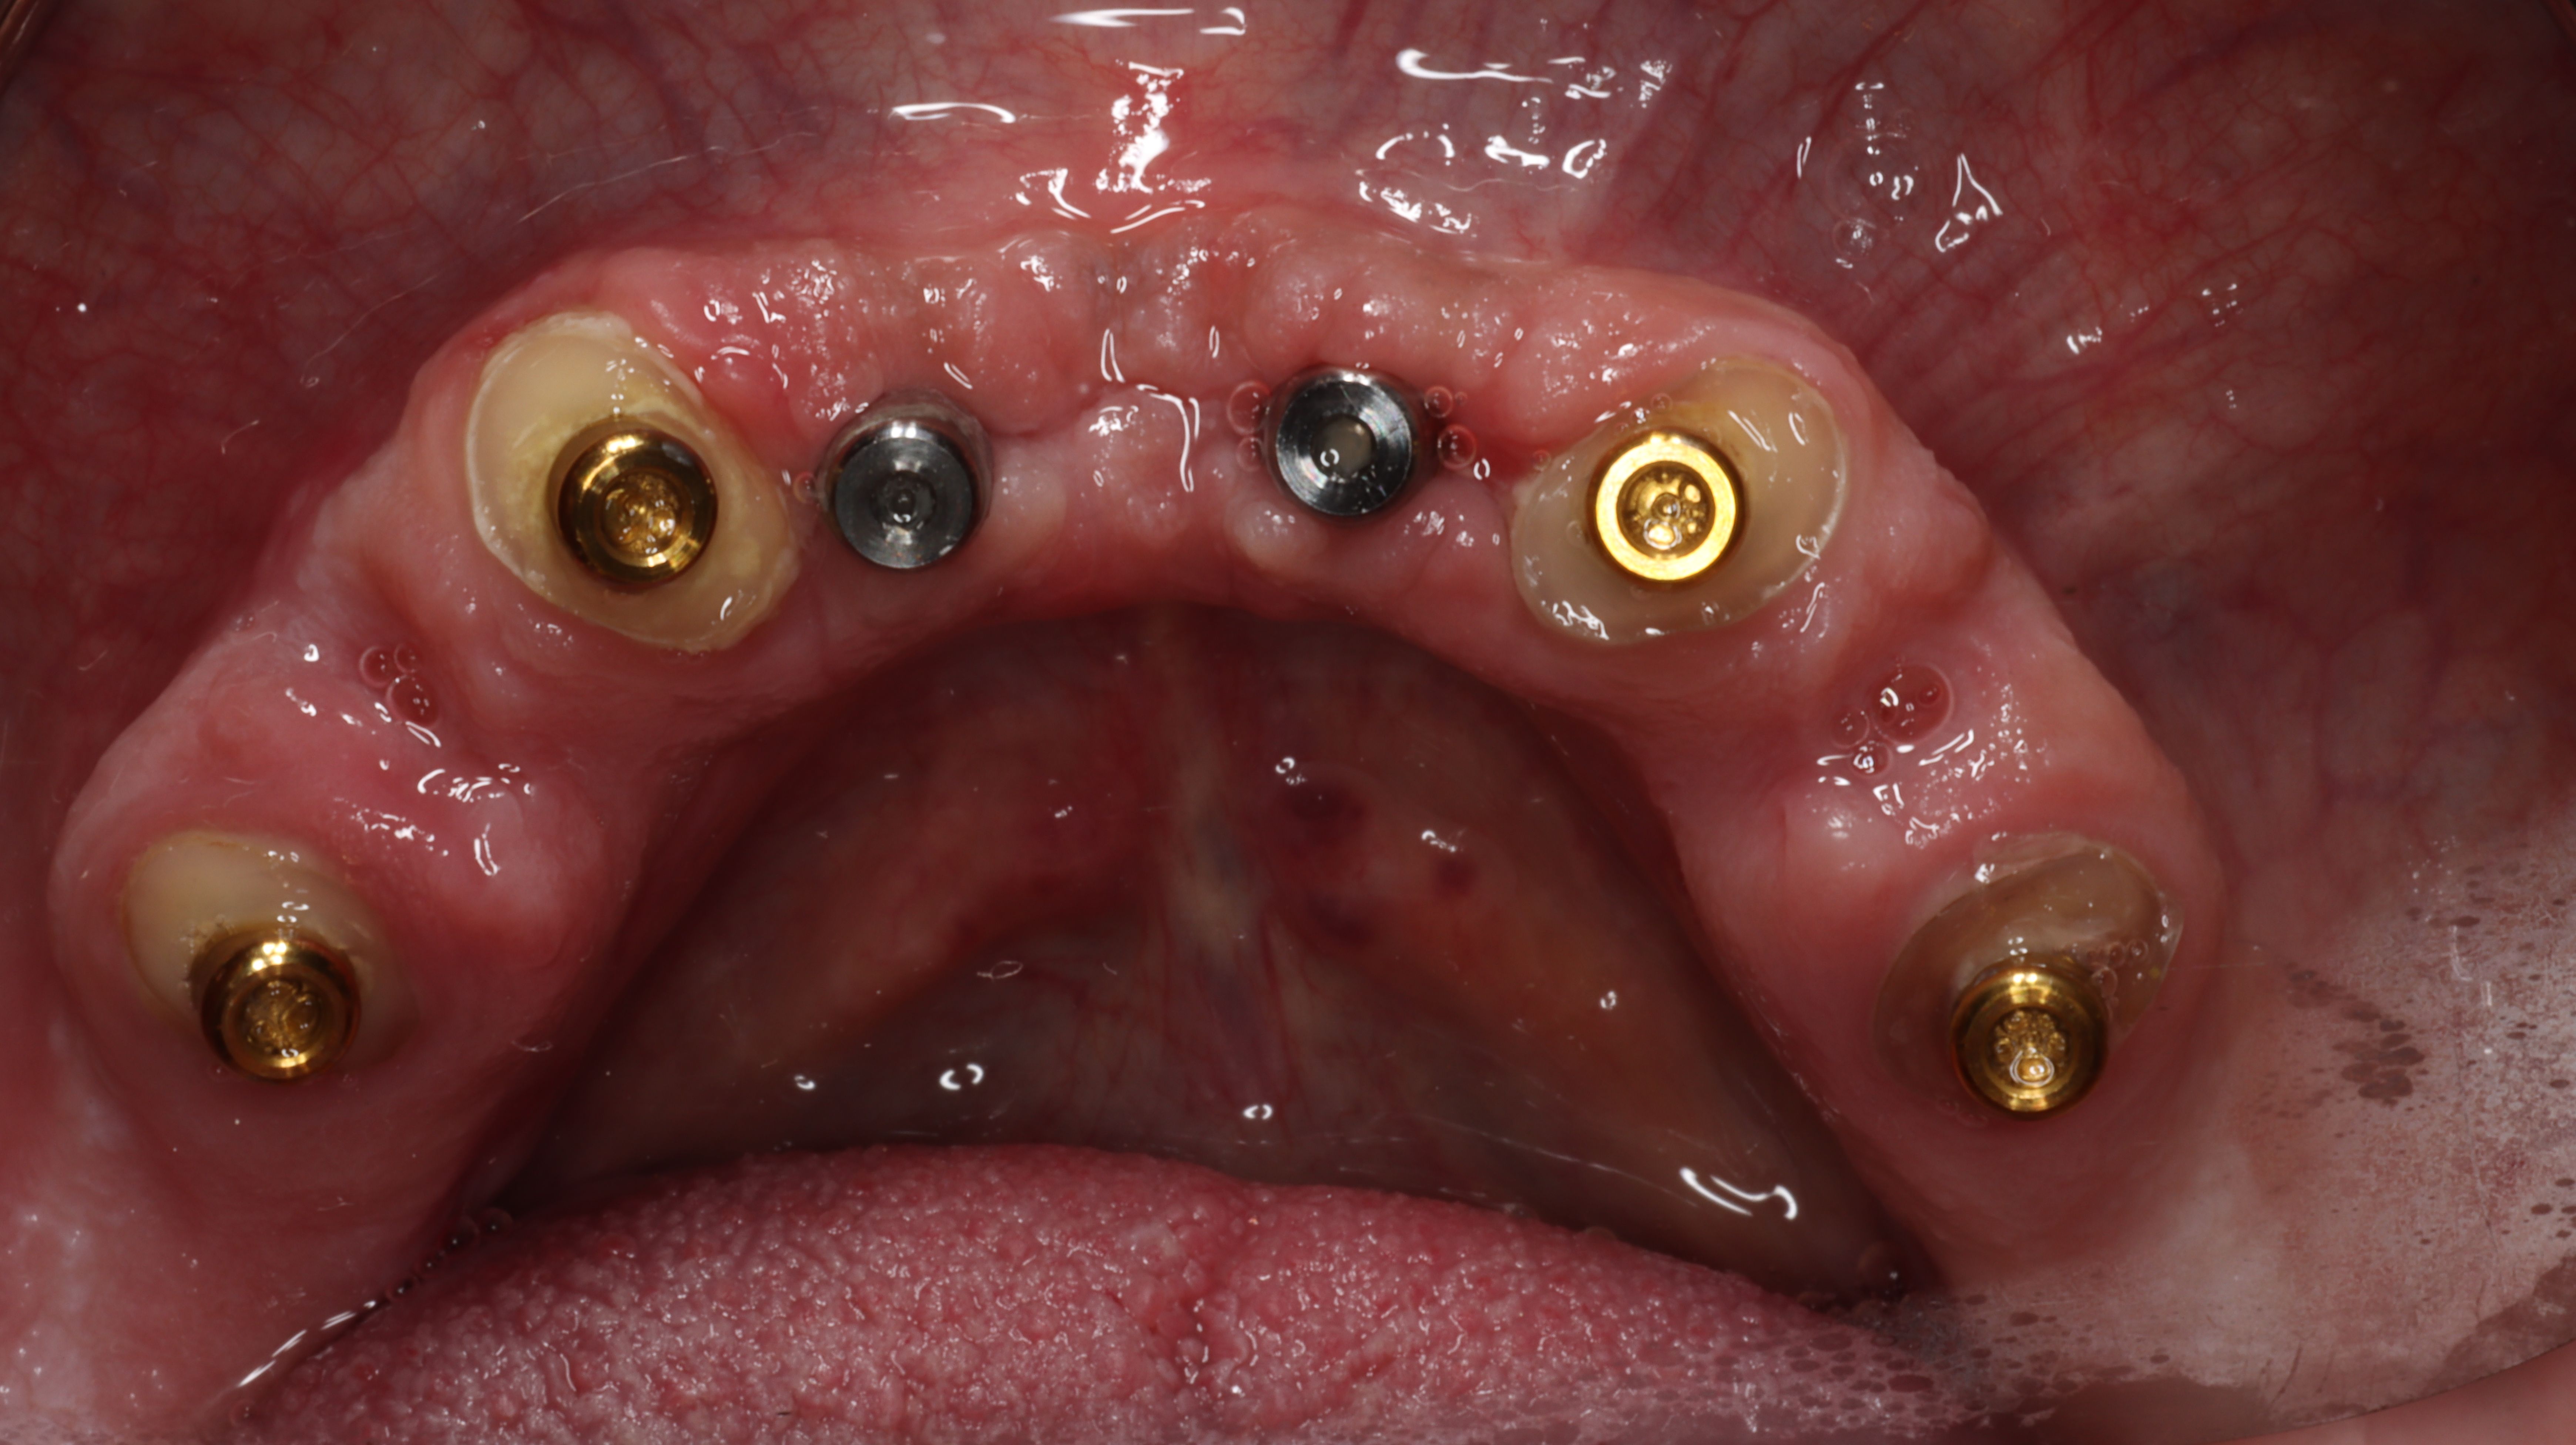 Figure 24. Two weeks post-op suture removal and adjustments of intaglio side of overdenture (Note the healed extraction sites and accelerated healing with PRP/PRF grafting biomaterials).